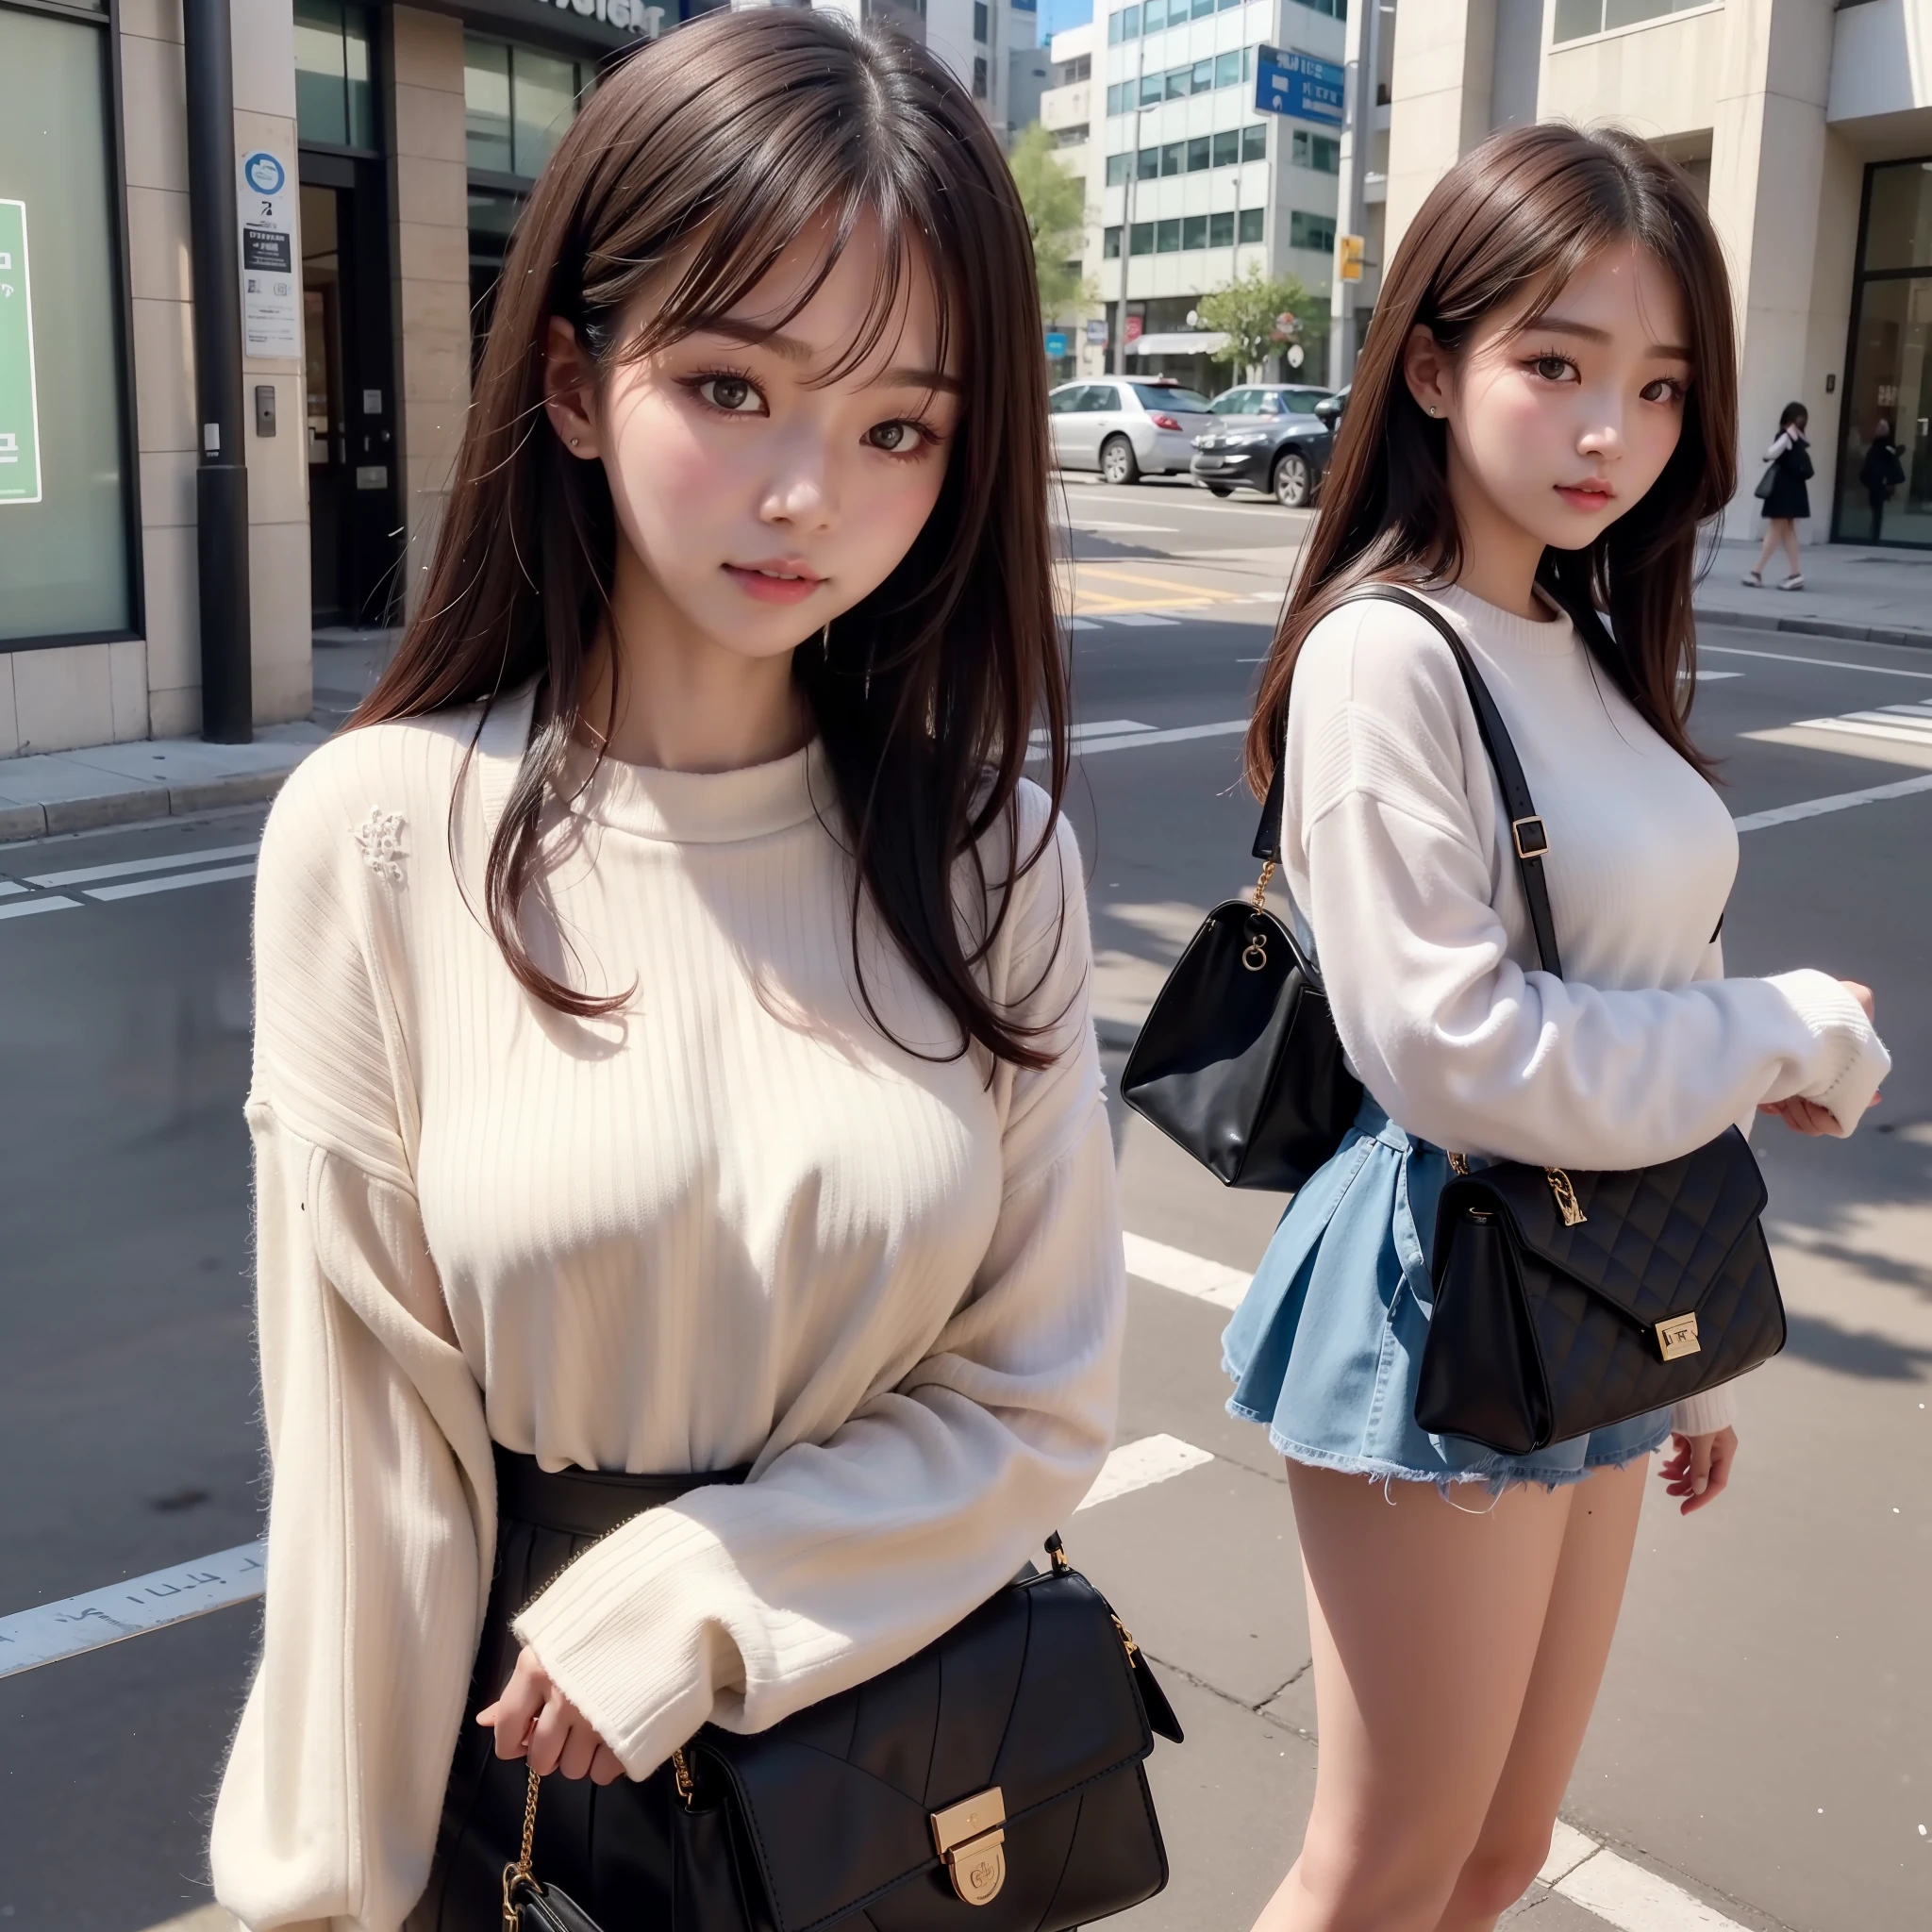 There is a woman who is on the street with a purse, Ulzzang, Korean girl, lovely young Korean face, beautiful young korean, beautiful young korean girl, wearing white sweater, young and beautiful girl, beautiful asian girl, with medium hair, beautiful south korean woman,